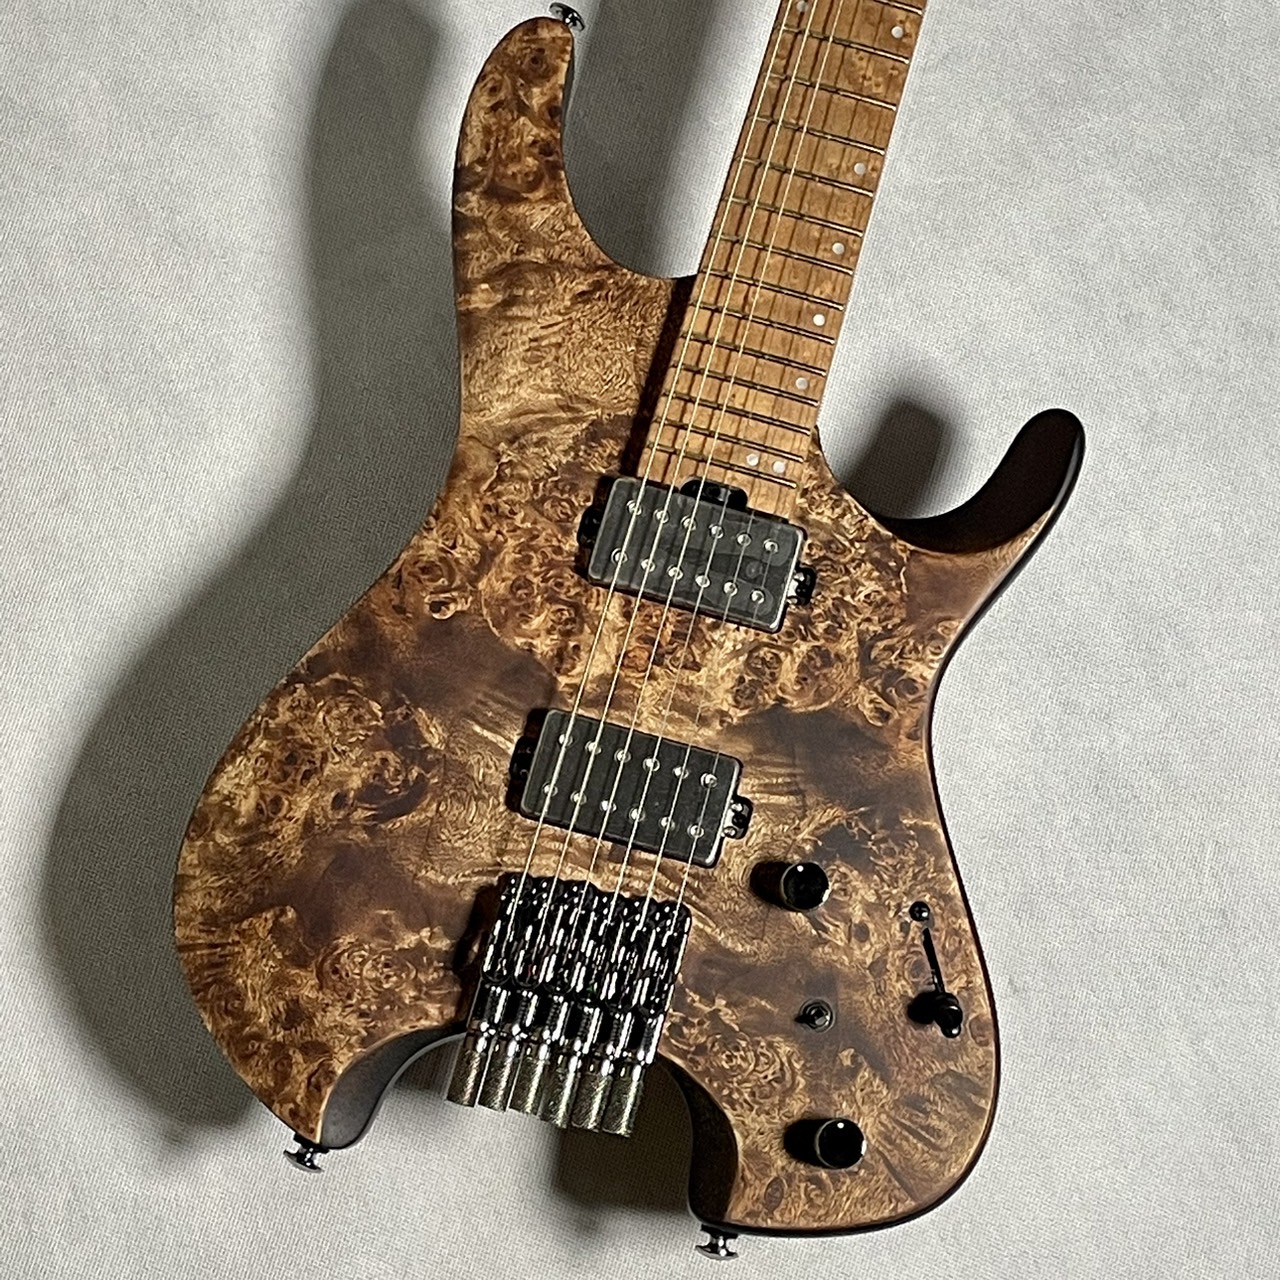 Ibanez Q52PB ABS Antique Brown Stained アイバニーズ 【 立川店